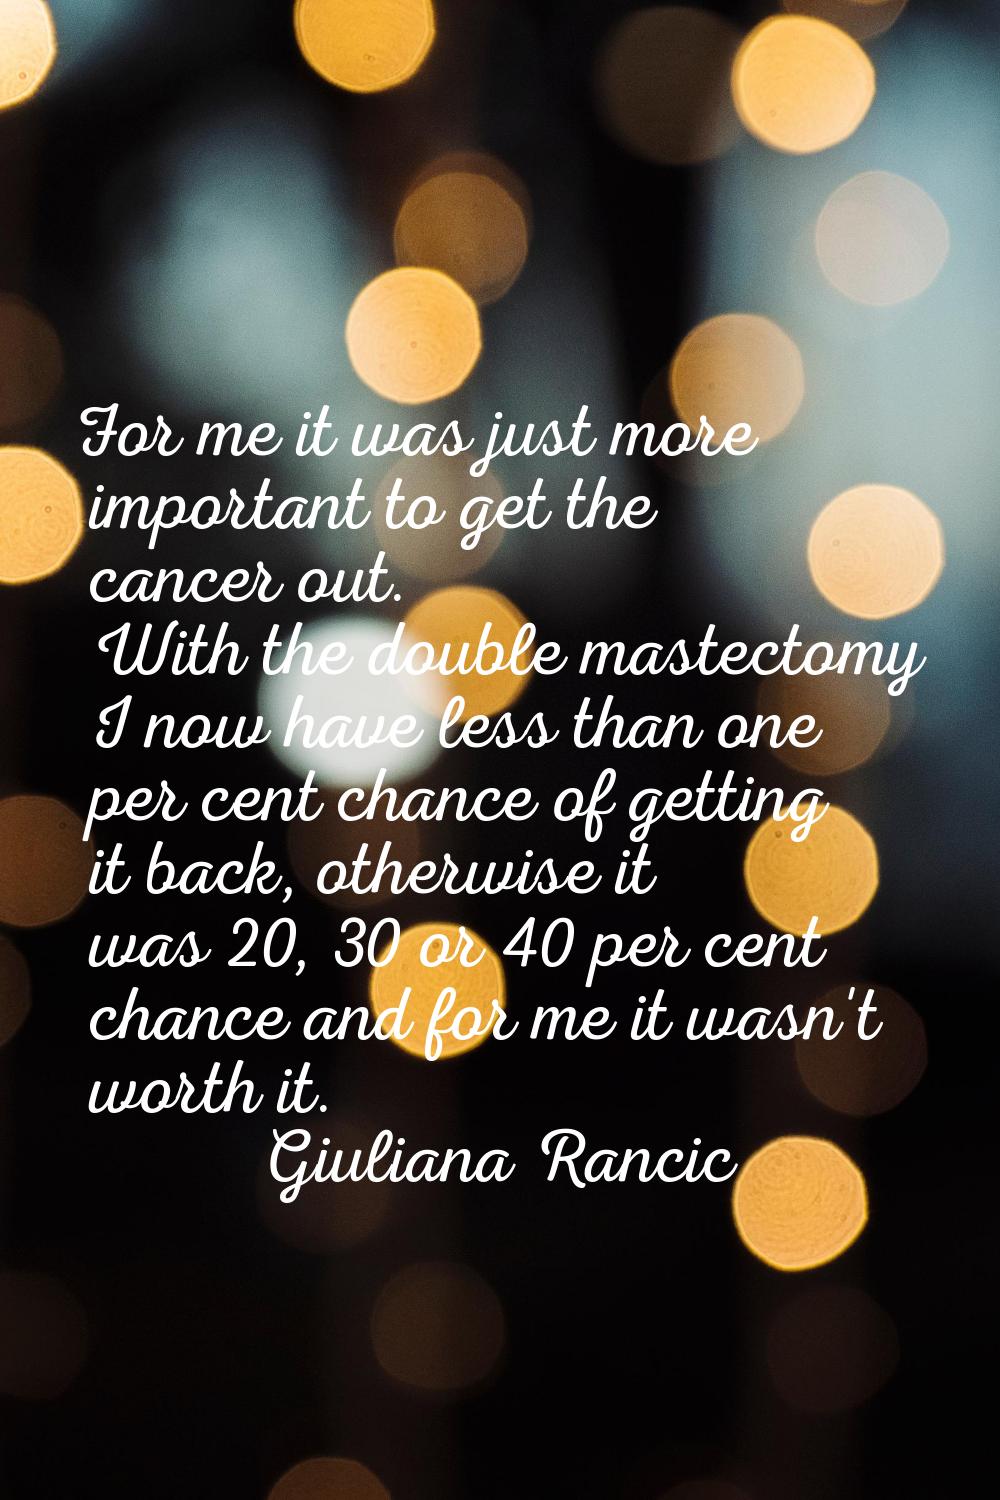 For me it was just more important to get the cancer out. With the double mastectomy I now have less